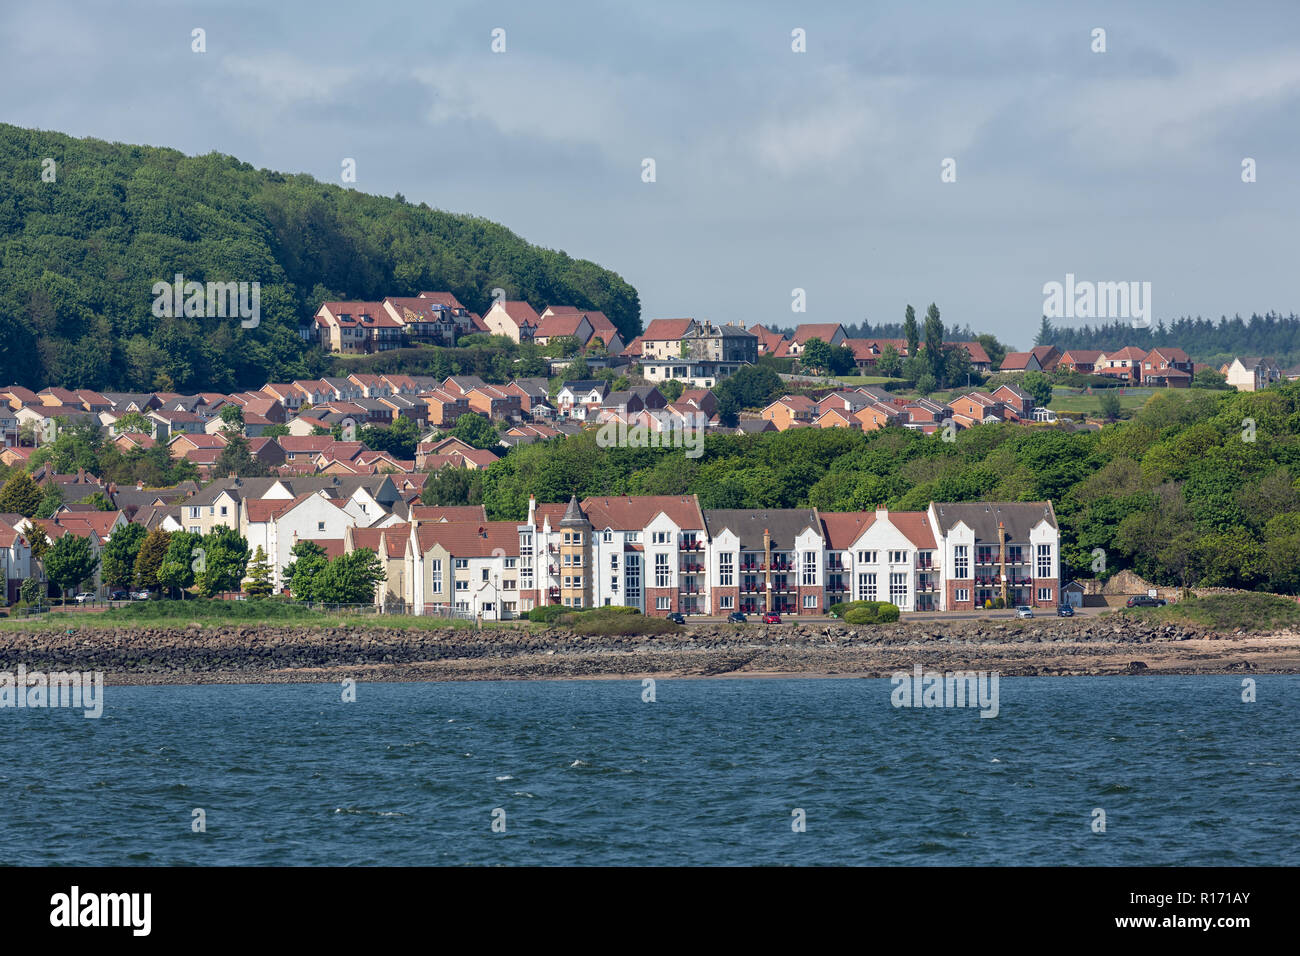 Seascape of Dalgety Bay, small village at Firth of Forth Scotland Stock Photo